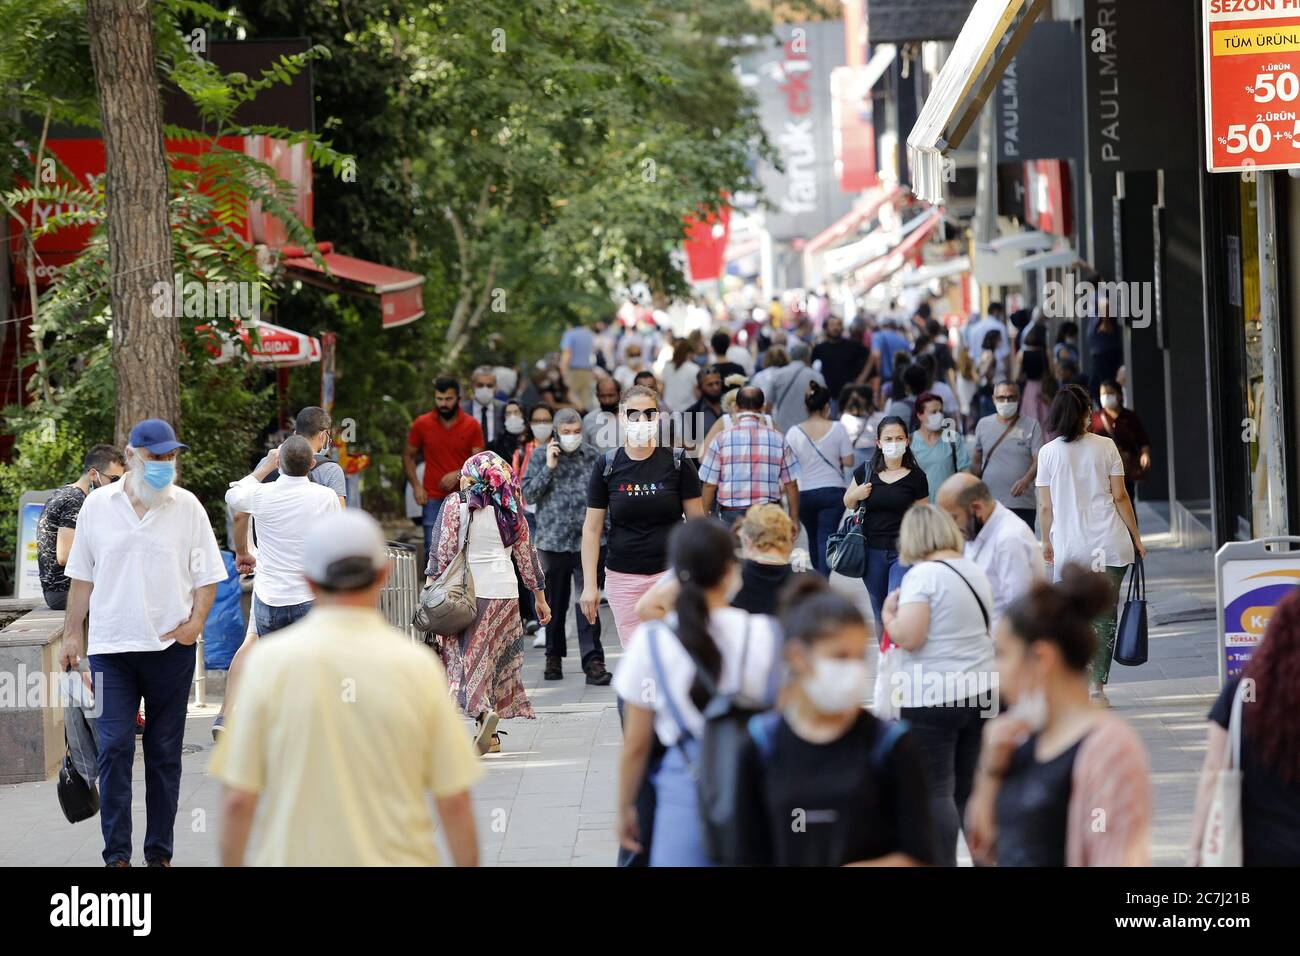 Ankara, Turkey. 17th July, 2020. People wearing face masks are seen on a street in Ankara, Turkey, on July 17, 2020. Turkish Health Minister Fahrettin Koca on Friday warned of the increasing number of intensive care and intubated COVID-19 patients in the country. Turkey's daily coronavirus cases increased by 926 on Friday, raising the overall number to 217,799, the minister said. Credit: Mustafa Kaya/Xinhua/Alamy Live News Stock Photo